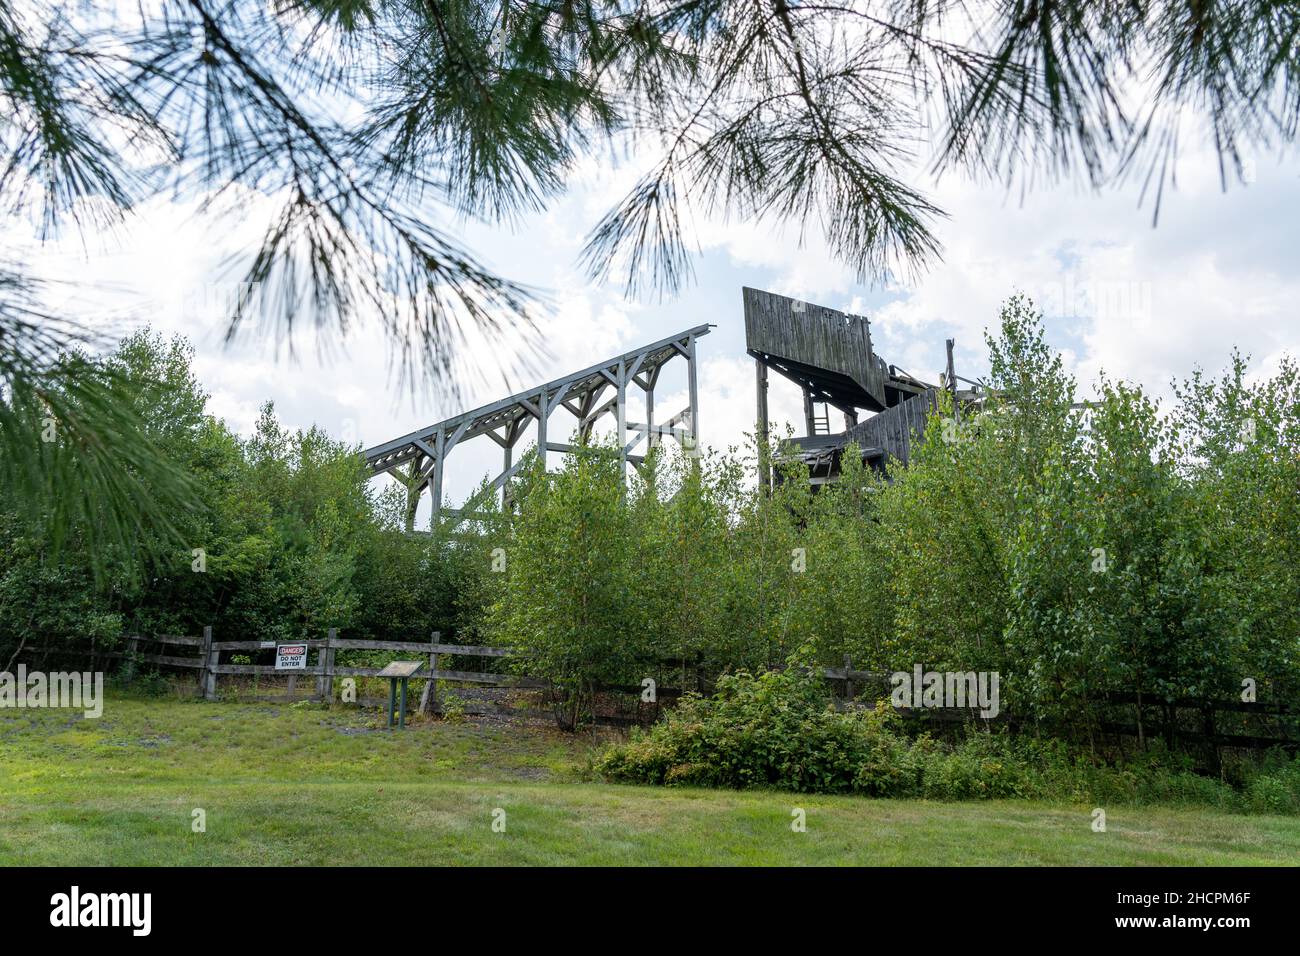 Historic Elevated Rails going to Coal Breaker Building in the Eckley Miners Village. Stock Photo